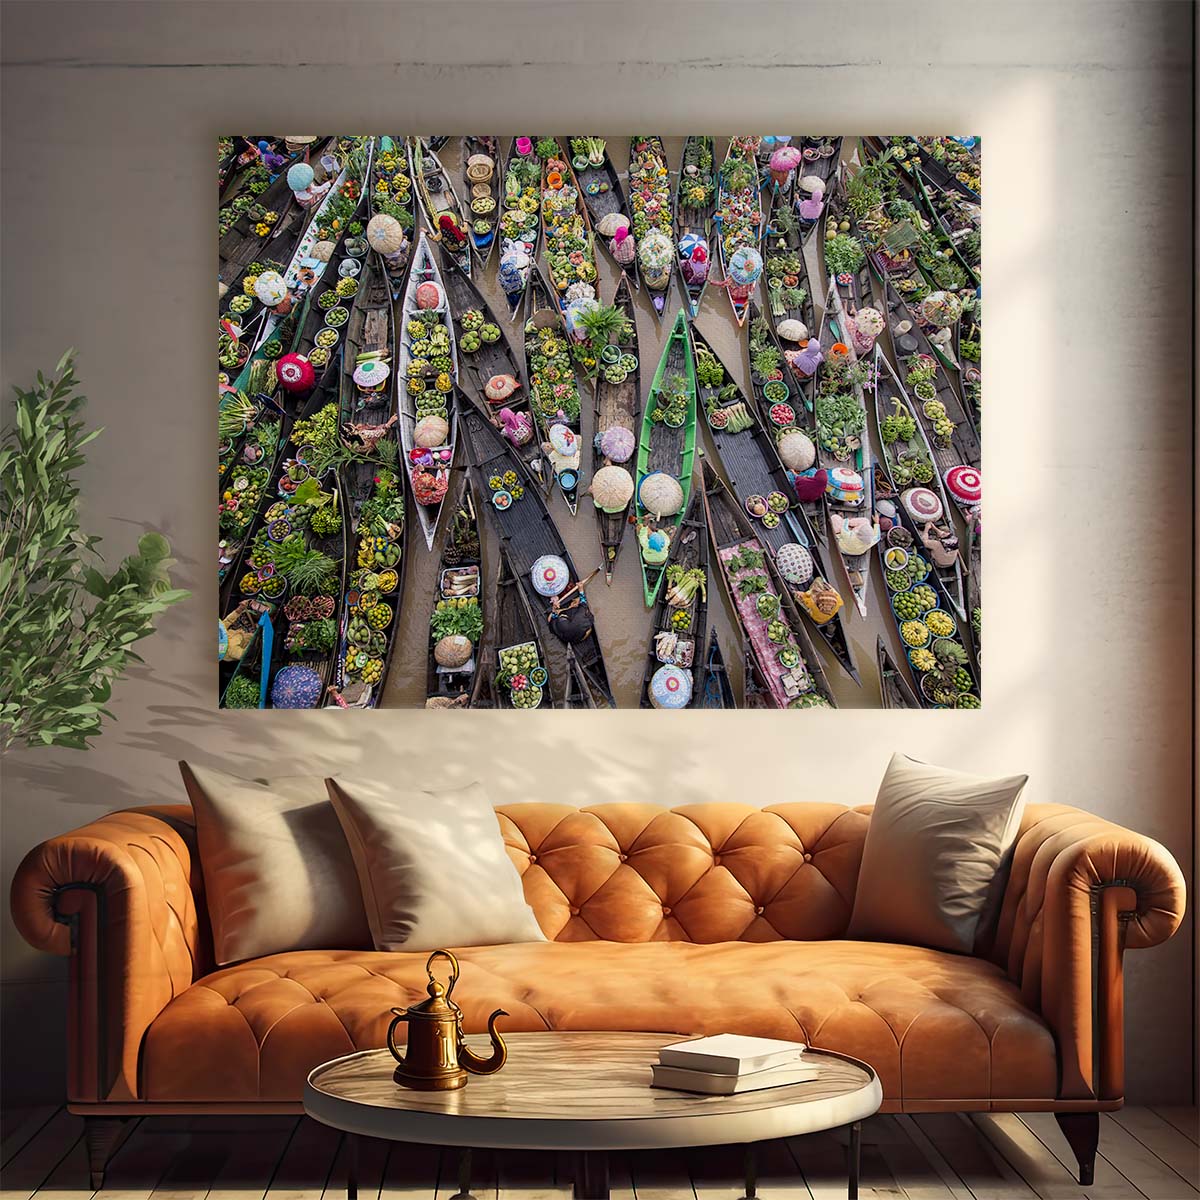 Vibrant Asian Floating Market Aerial View Wall Art by Luxuriance Designs. Made in USA.